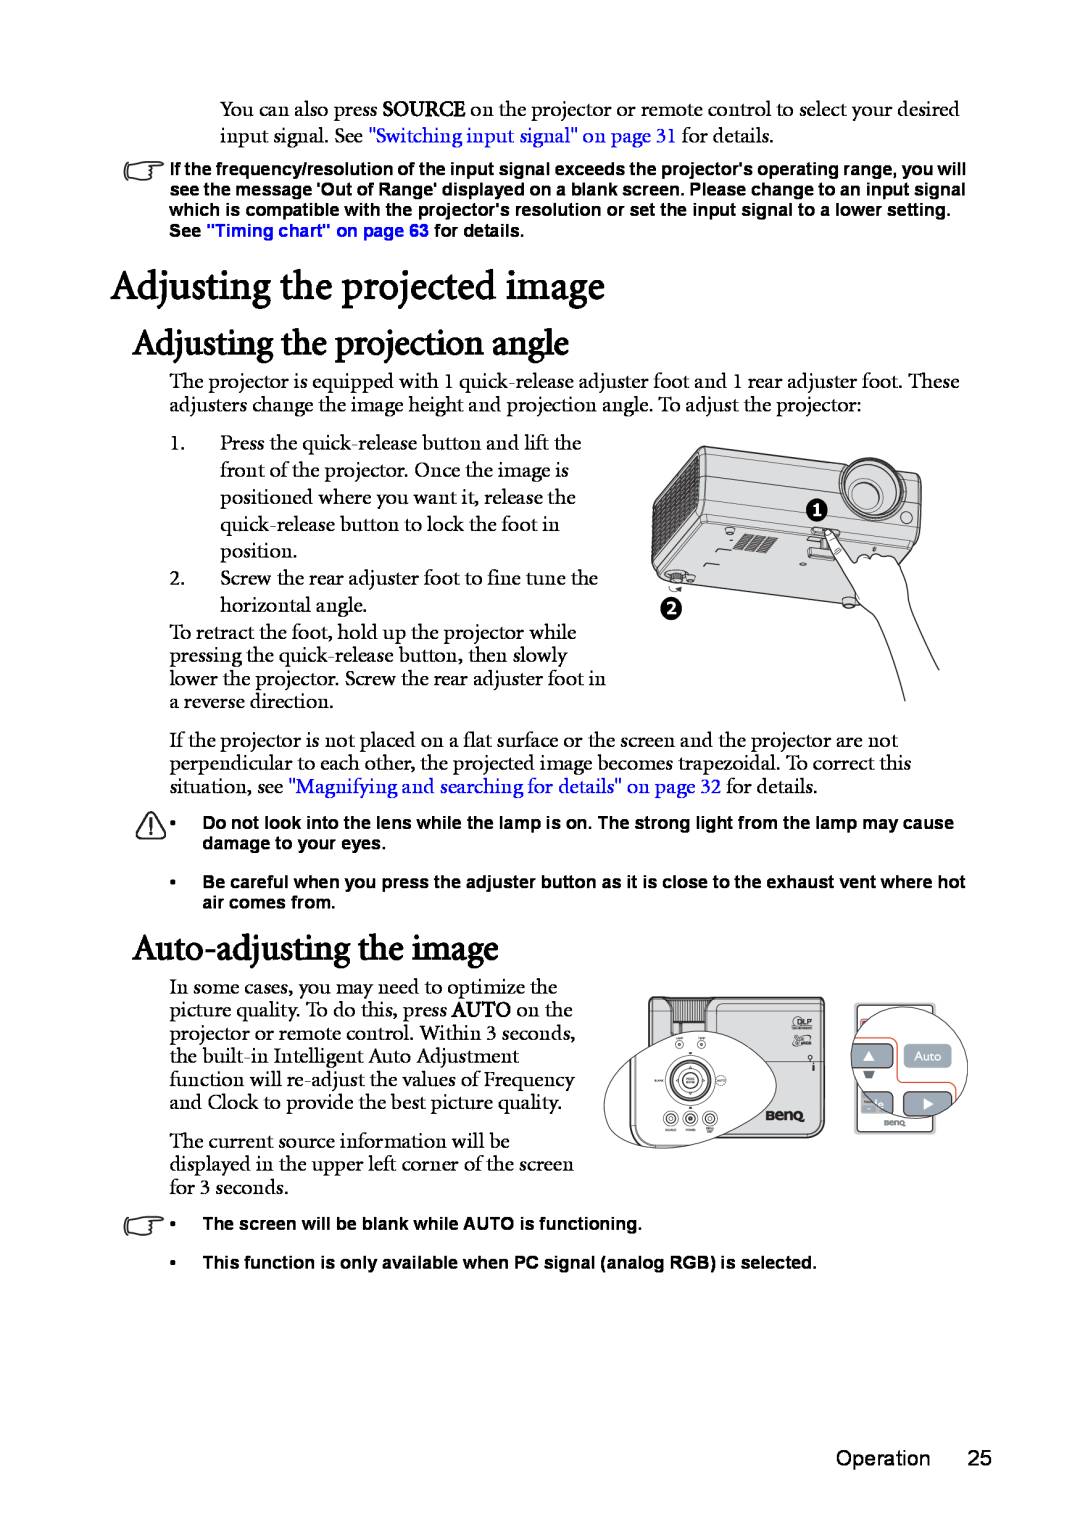 BenQ MP625P Adjusting the projected image, Adjusting the projection angle, Auto-adjusting the image, horizontal angle 